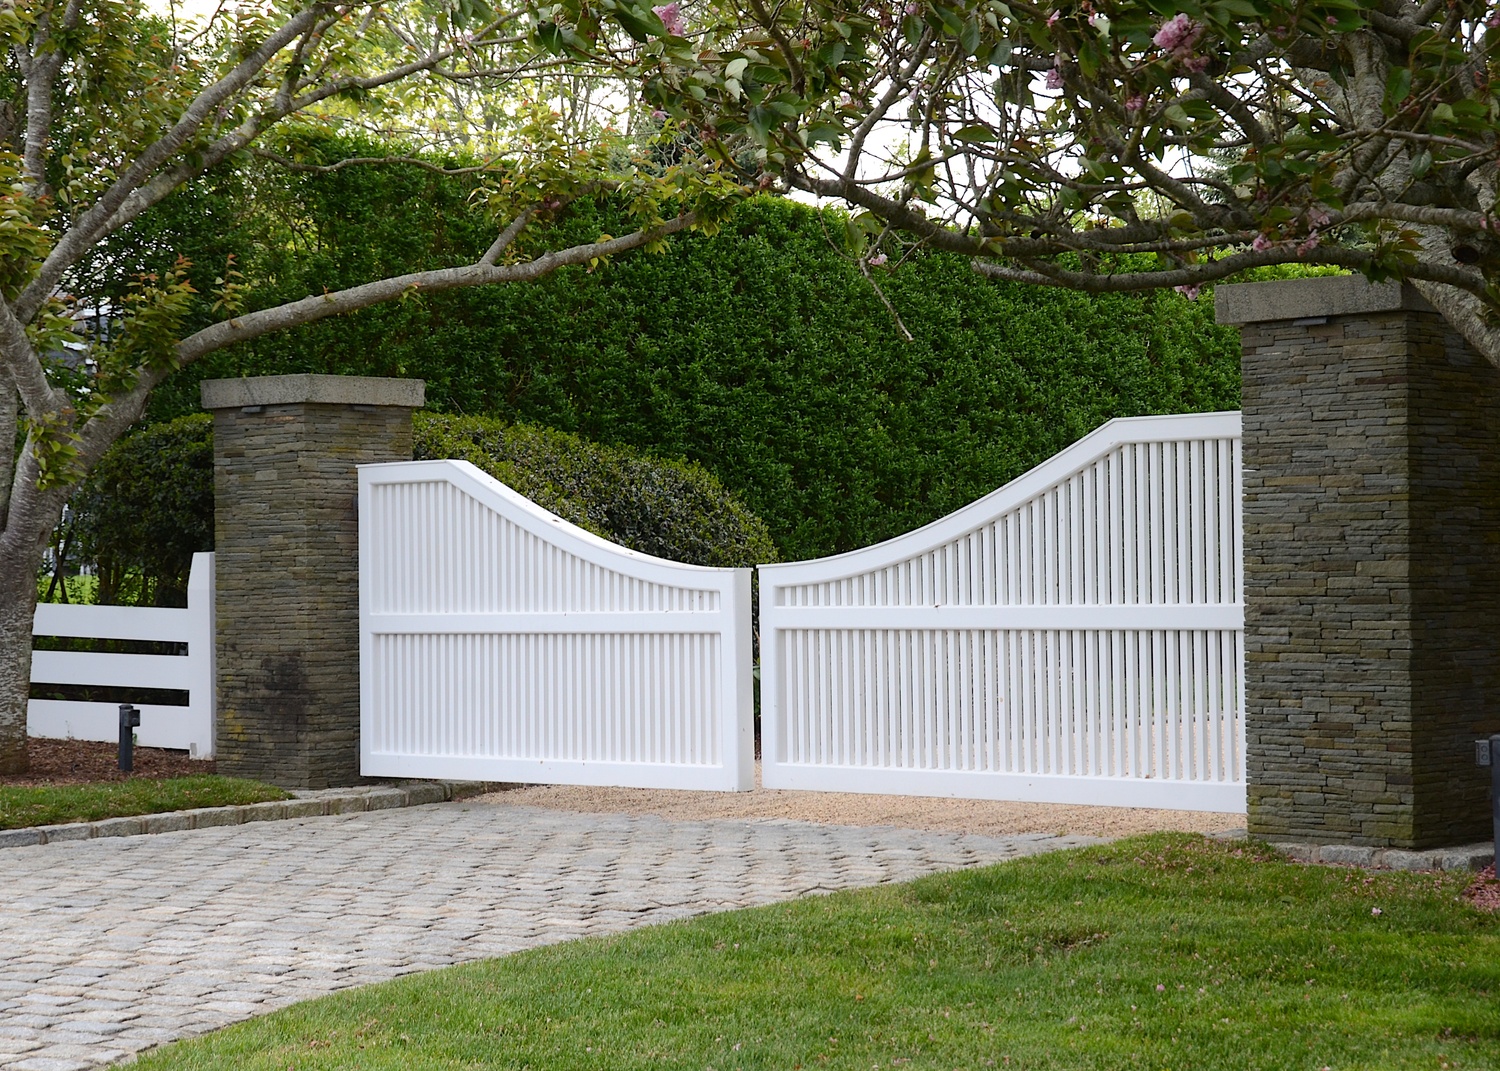 The question of whether to ban driveway gates in Sagaponack Village was debated at a public hearing on May 10. Many residents said they believe the gates are essential to keep their children and pets safe.  KYRIL BROMLEY